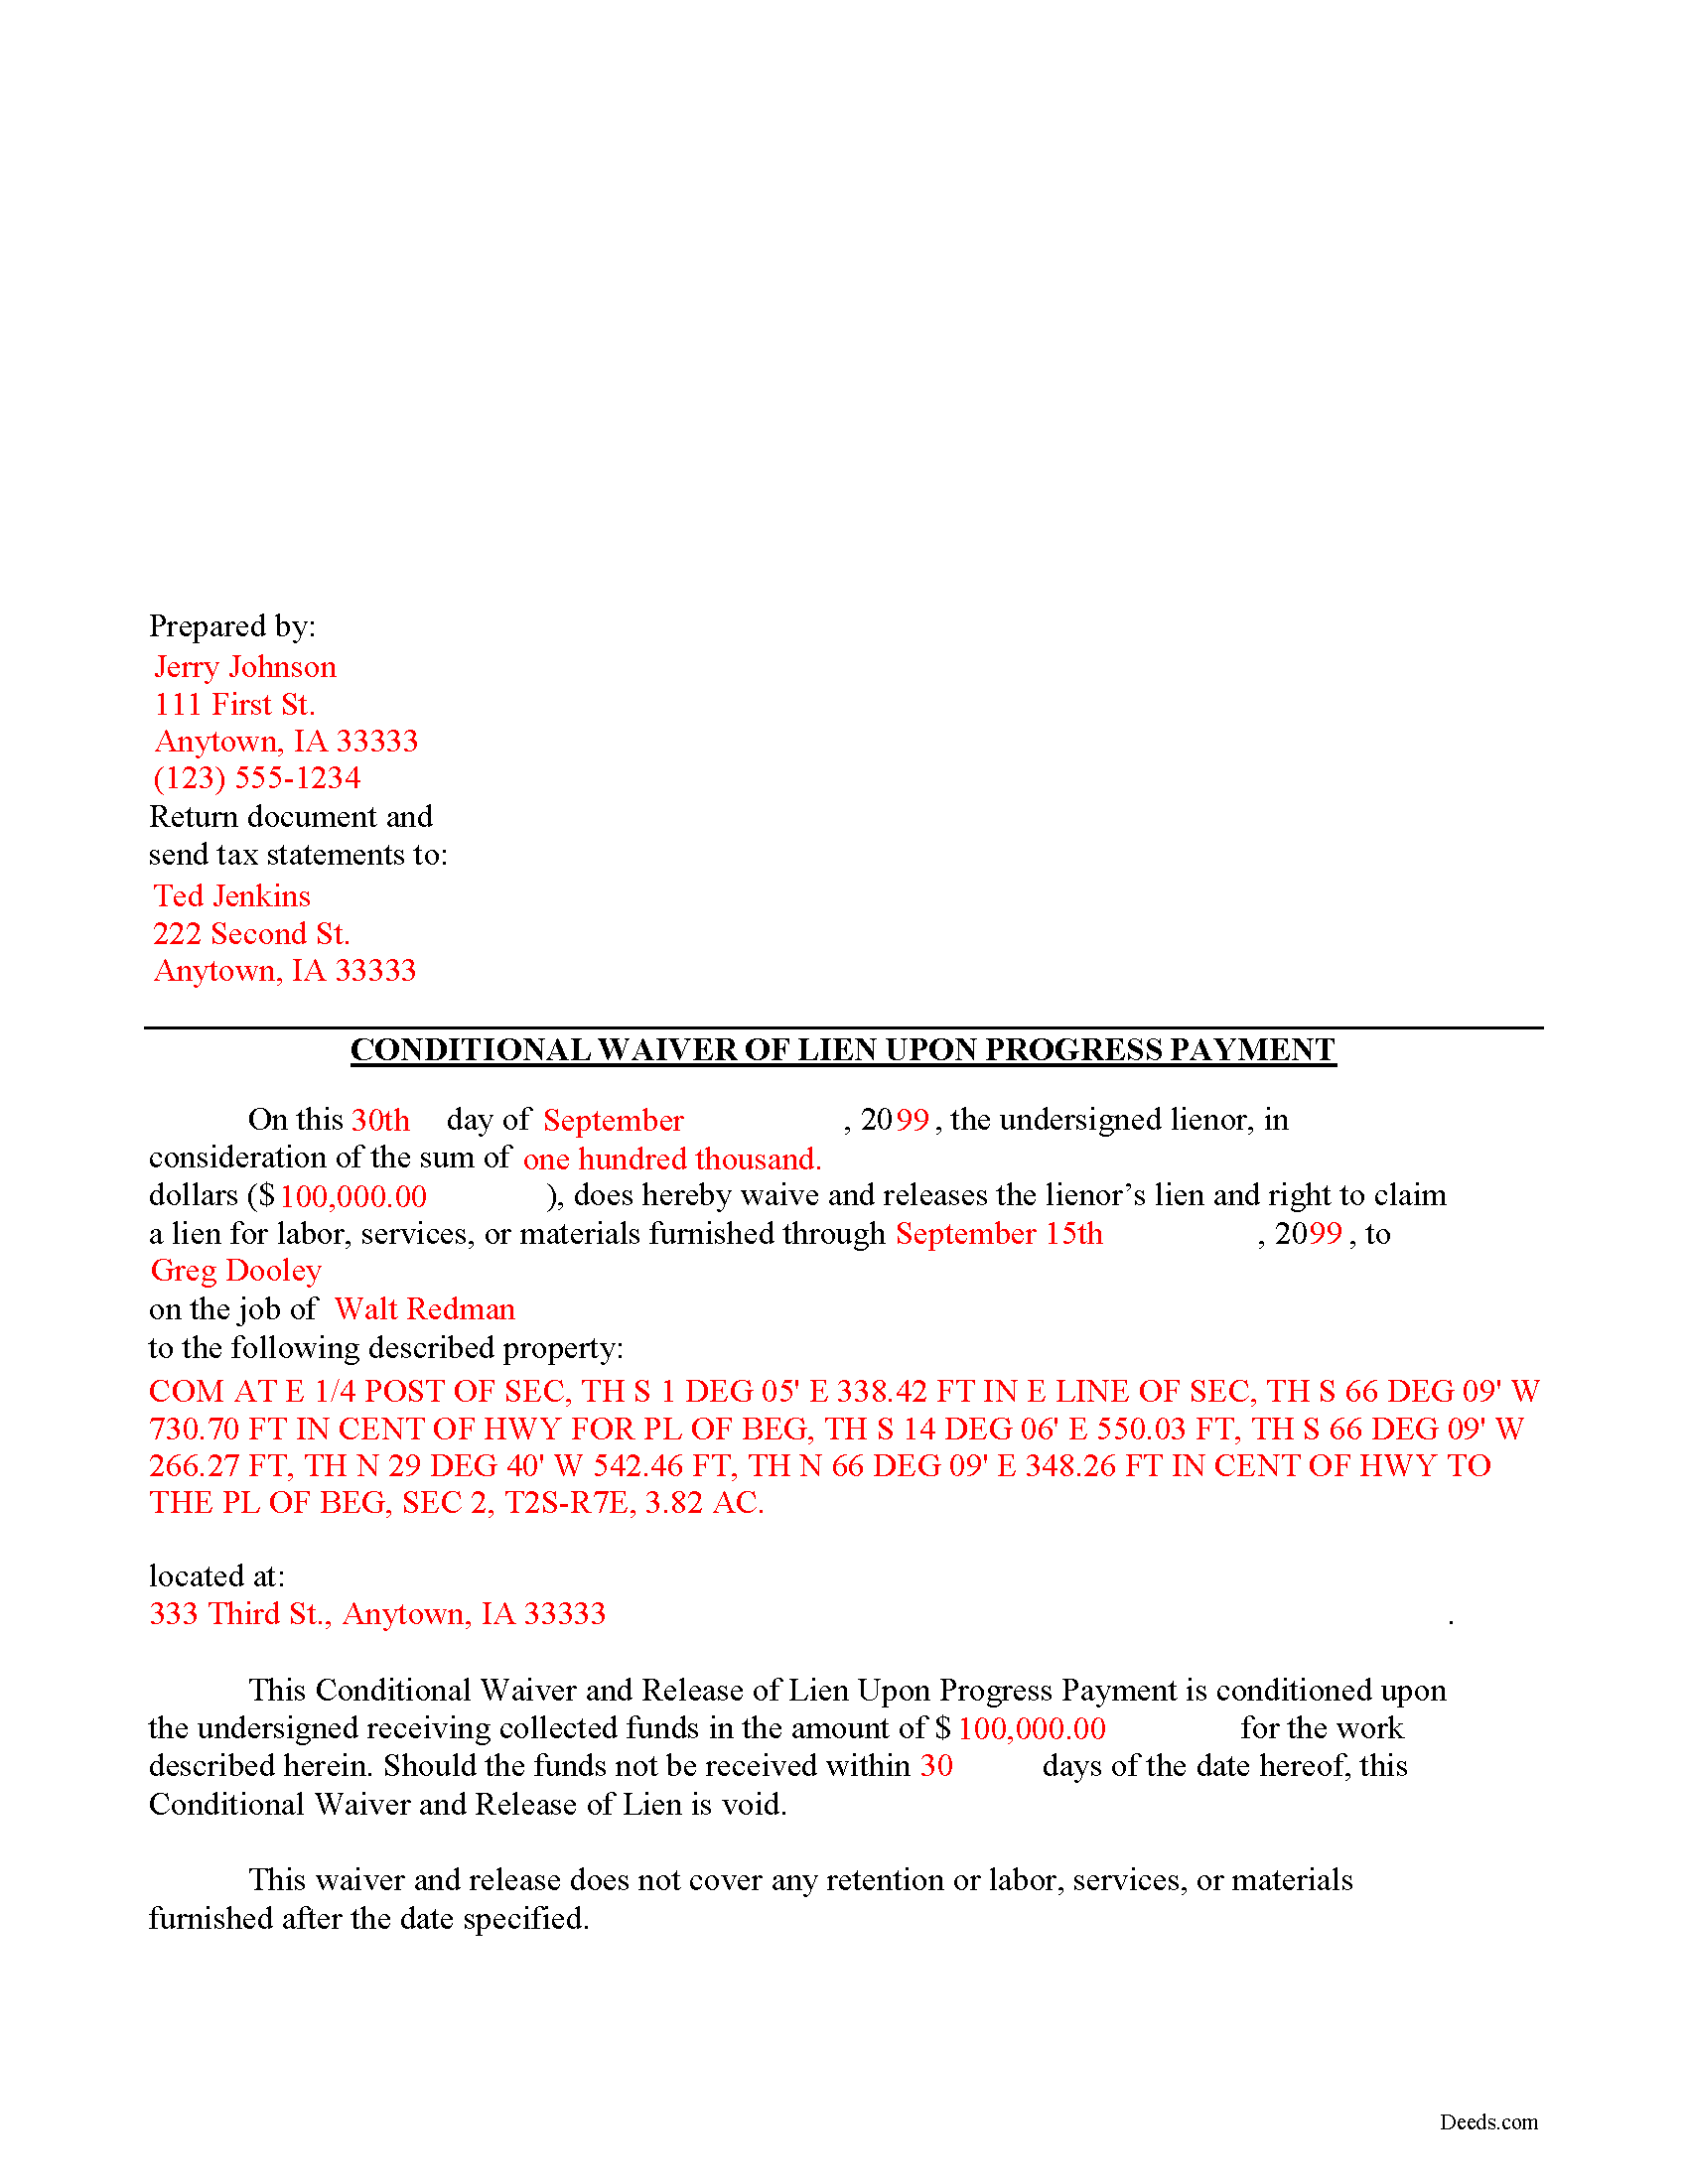 Completed Example of the Conditional Lien Waiver upon Progress Payment Document